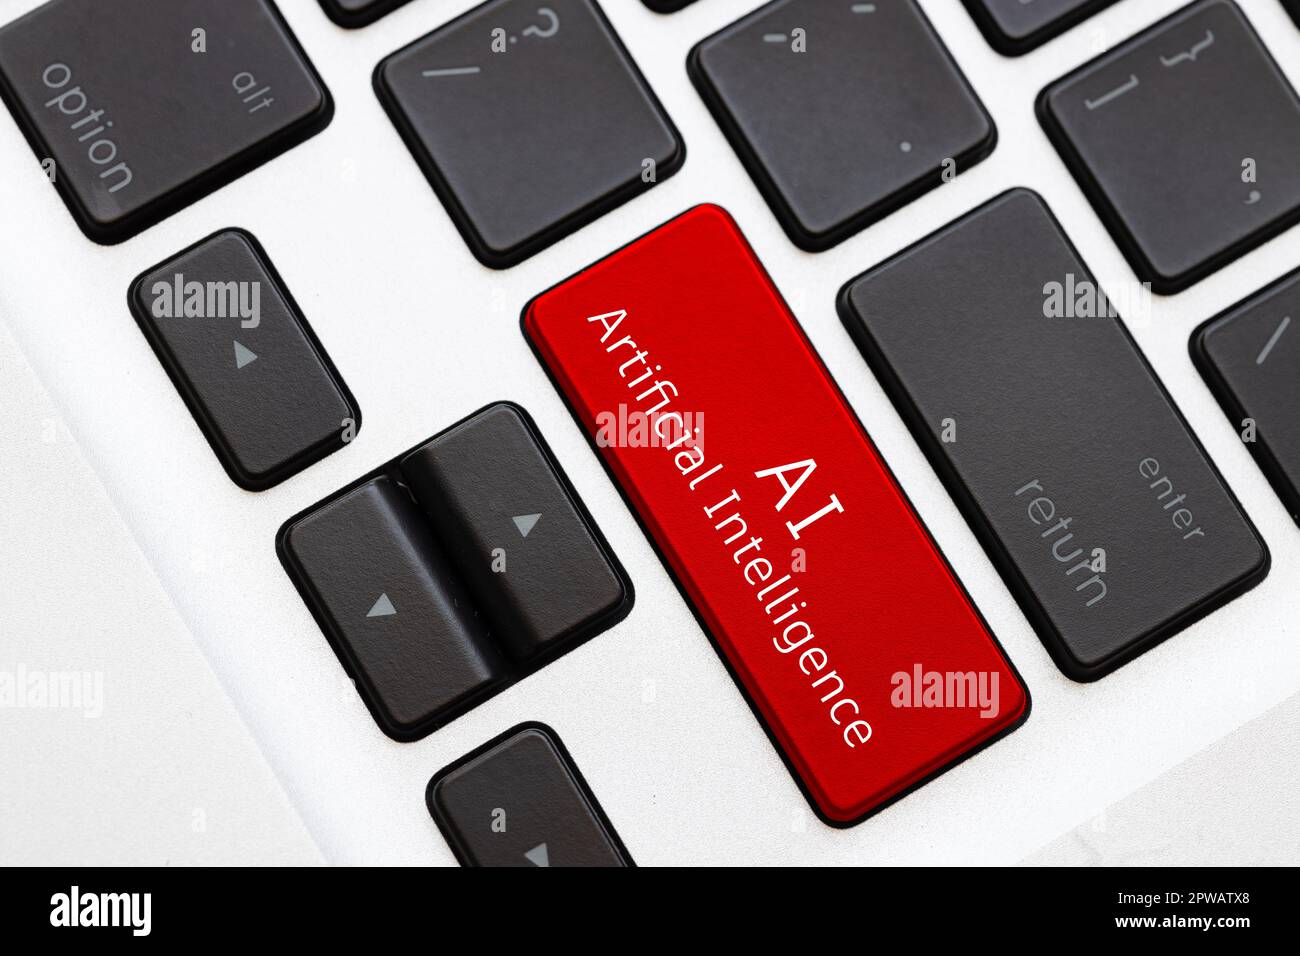 AI - Artificial Intelligence word text on computer keyboard. Auto smart chat in business working technology concept. Stock Photo